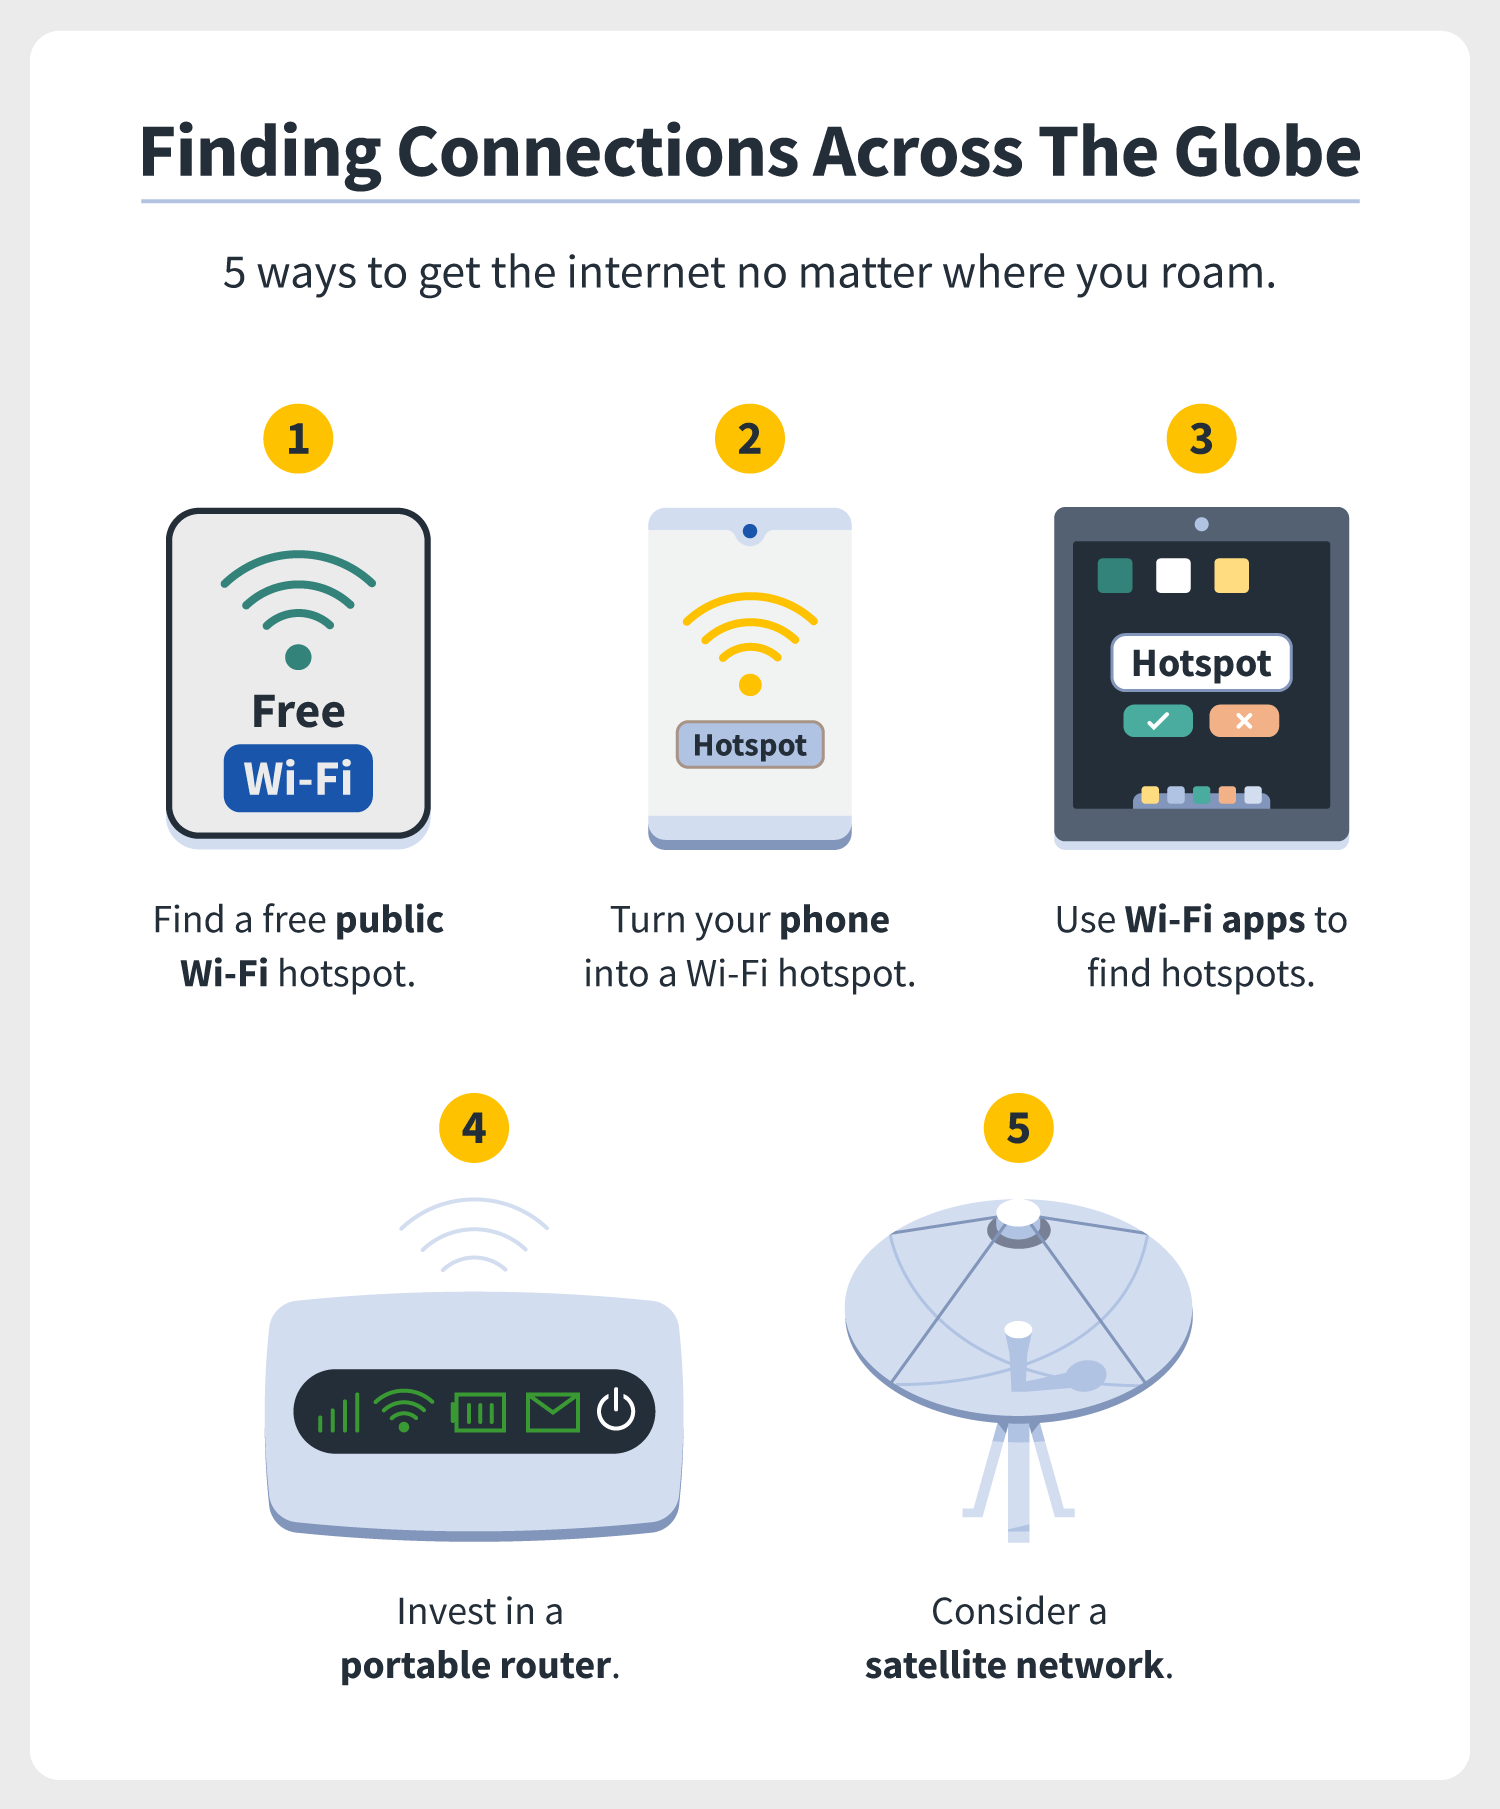 Get internet no matter where you roam by finding a free public Wi-Fi hotspot, investing in a portable router, and considering a satellite network.